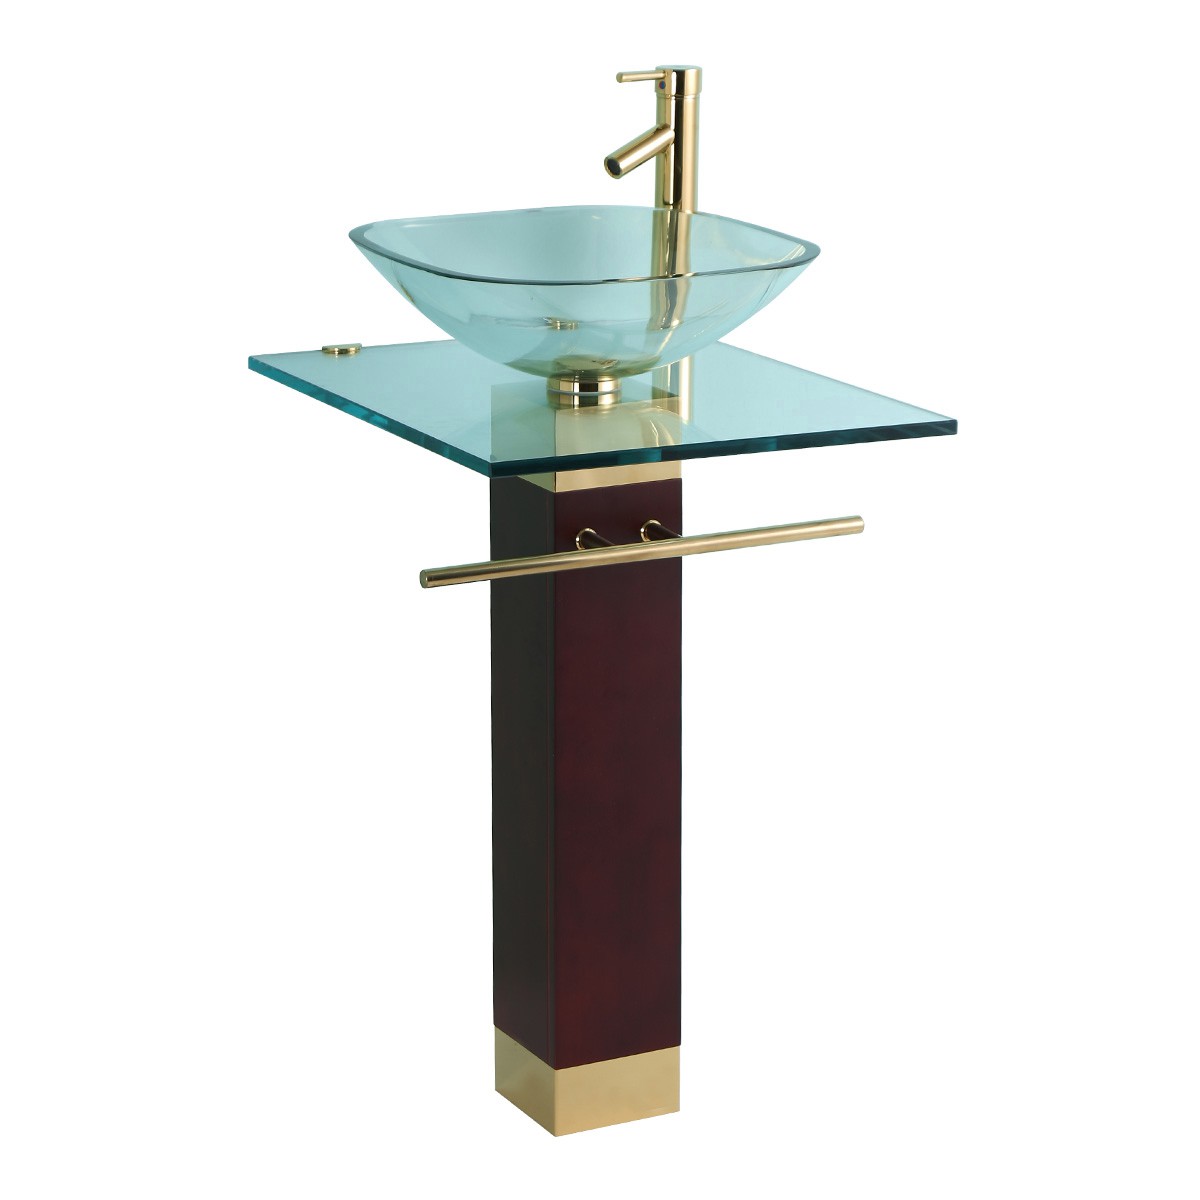 Photo 1 of Renovators Supply Bohemia 23 5/8" Glass Pedestal Bathroom Sink Gold Brass Accents with Towel Bar Faucet and Drain